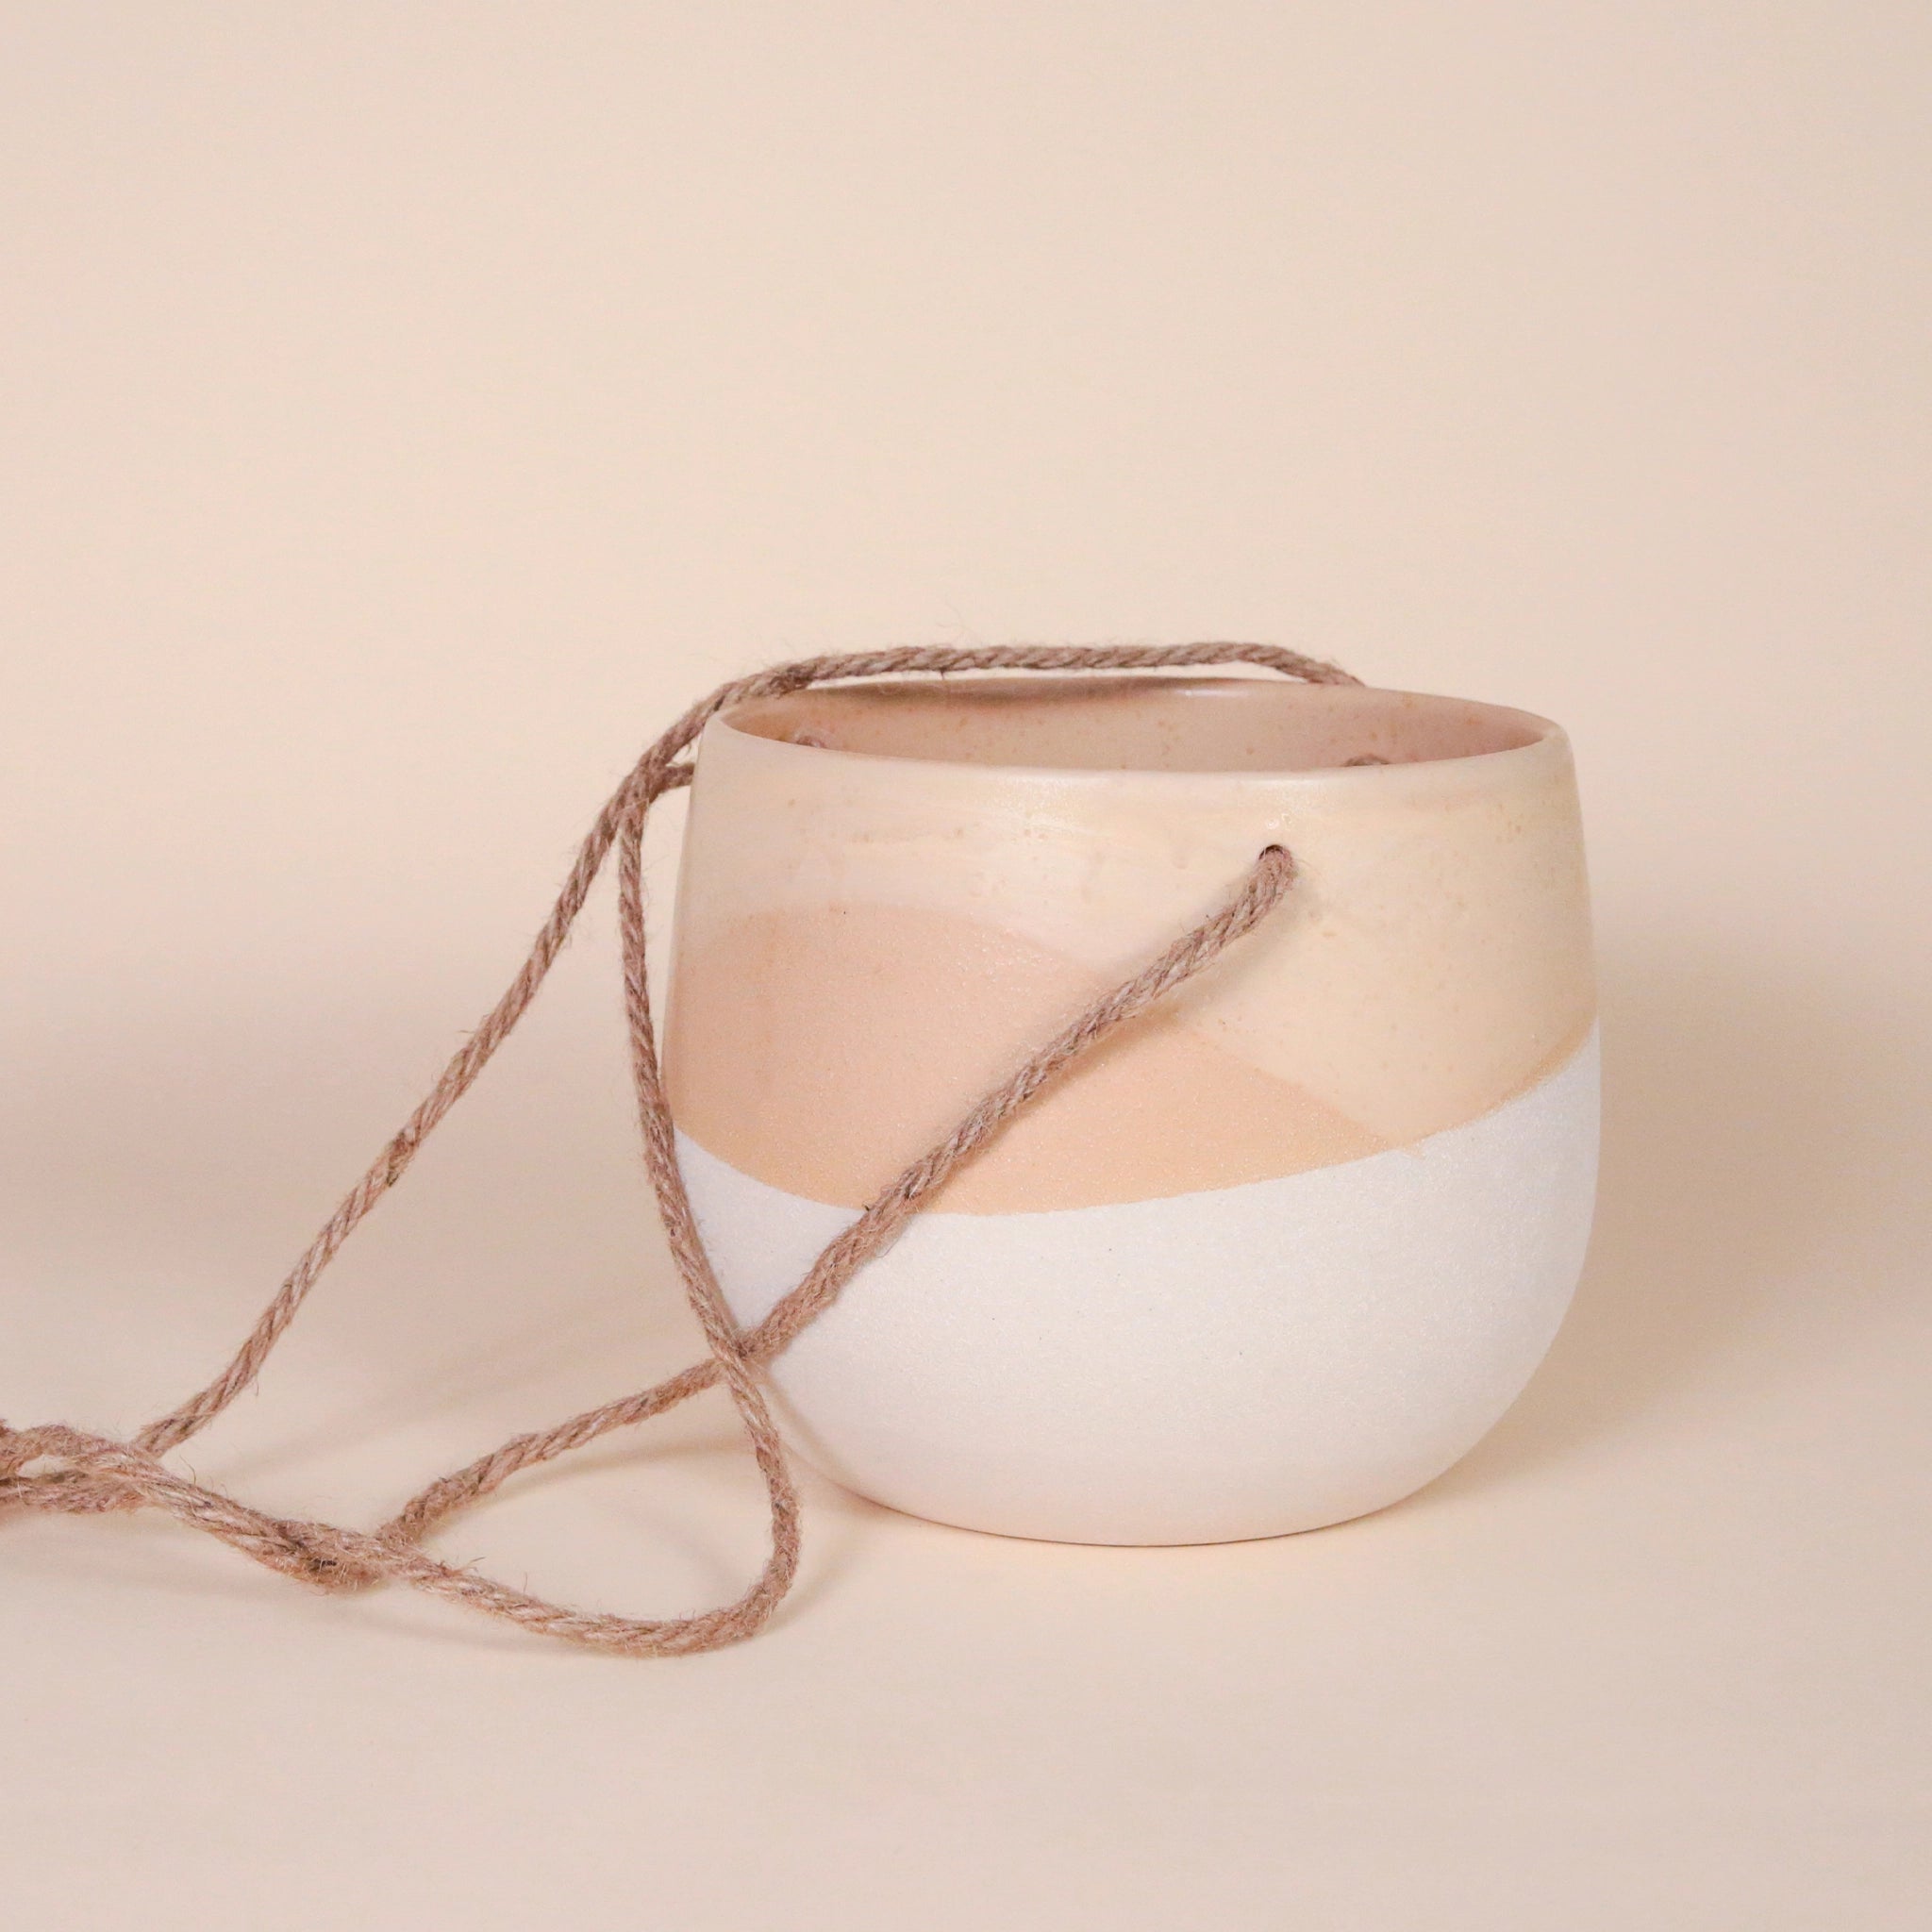 A ceramic circle planter with a wavy design featuring the top half as a neutral tan shade and the bottom half white along with three tan ropes tied together at the top in order to hang.